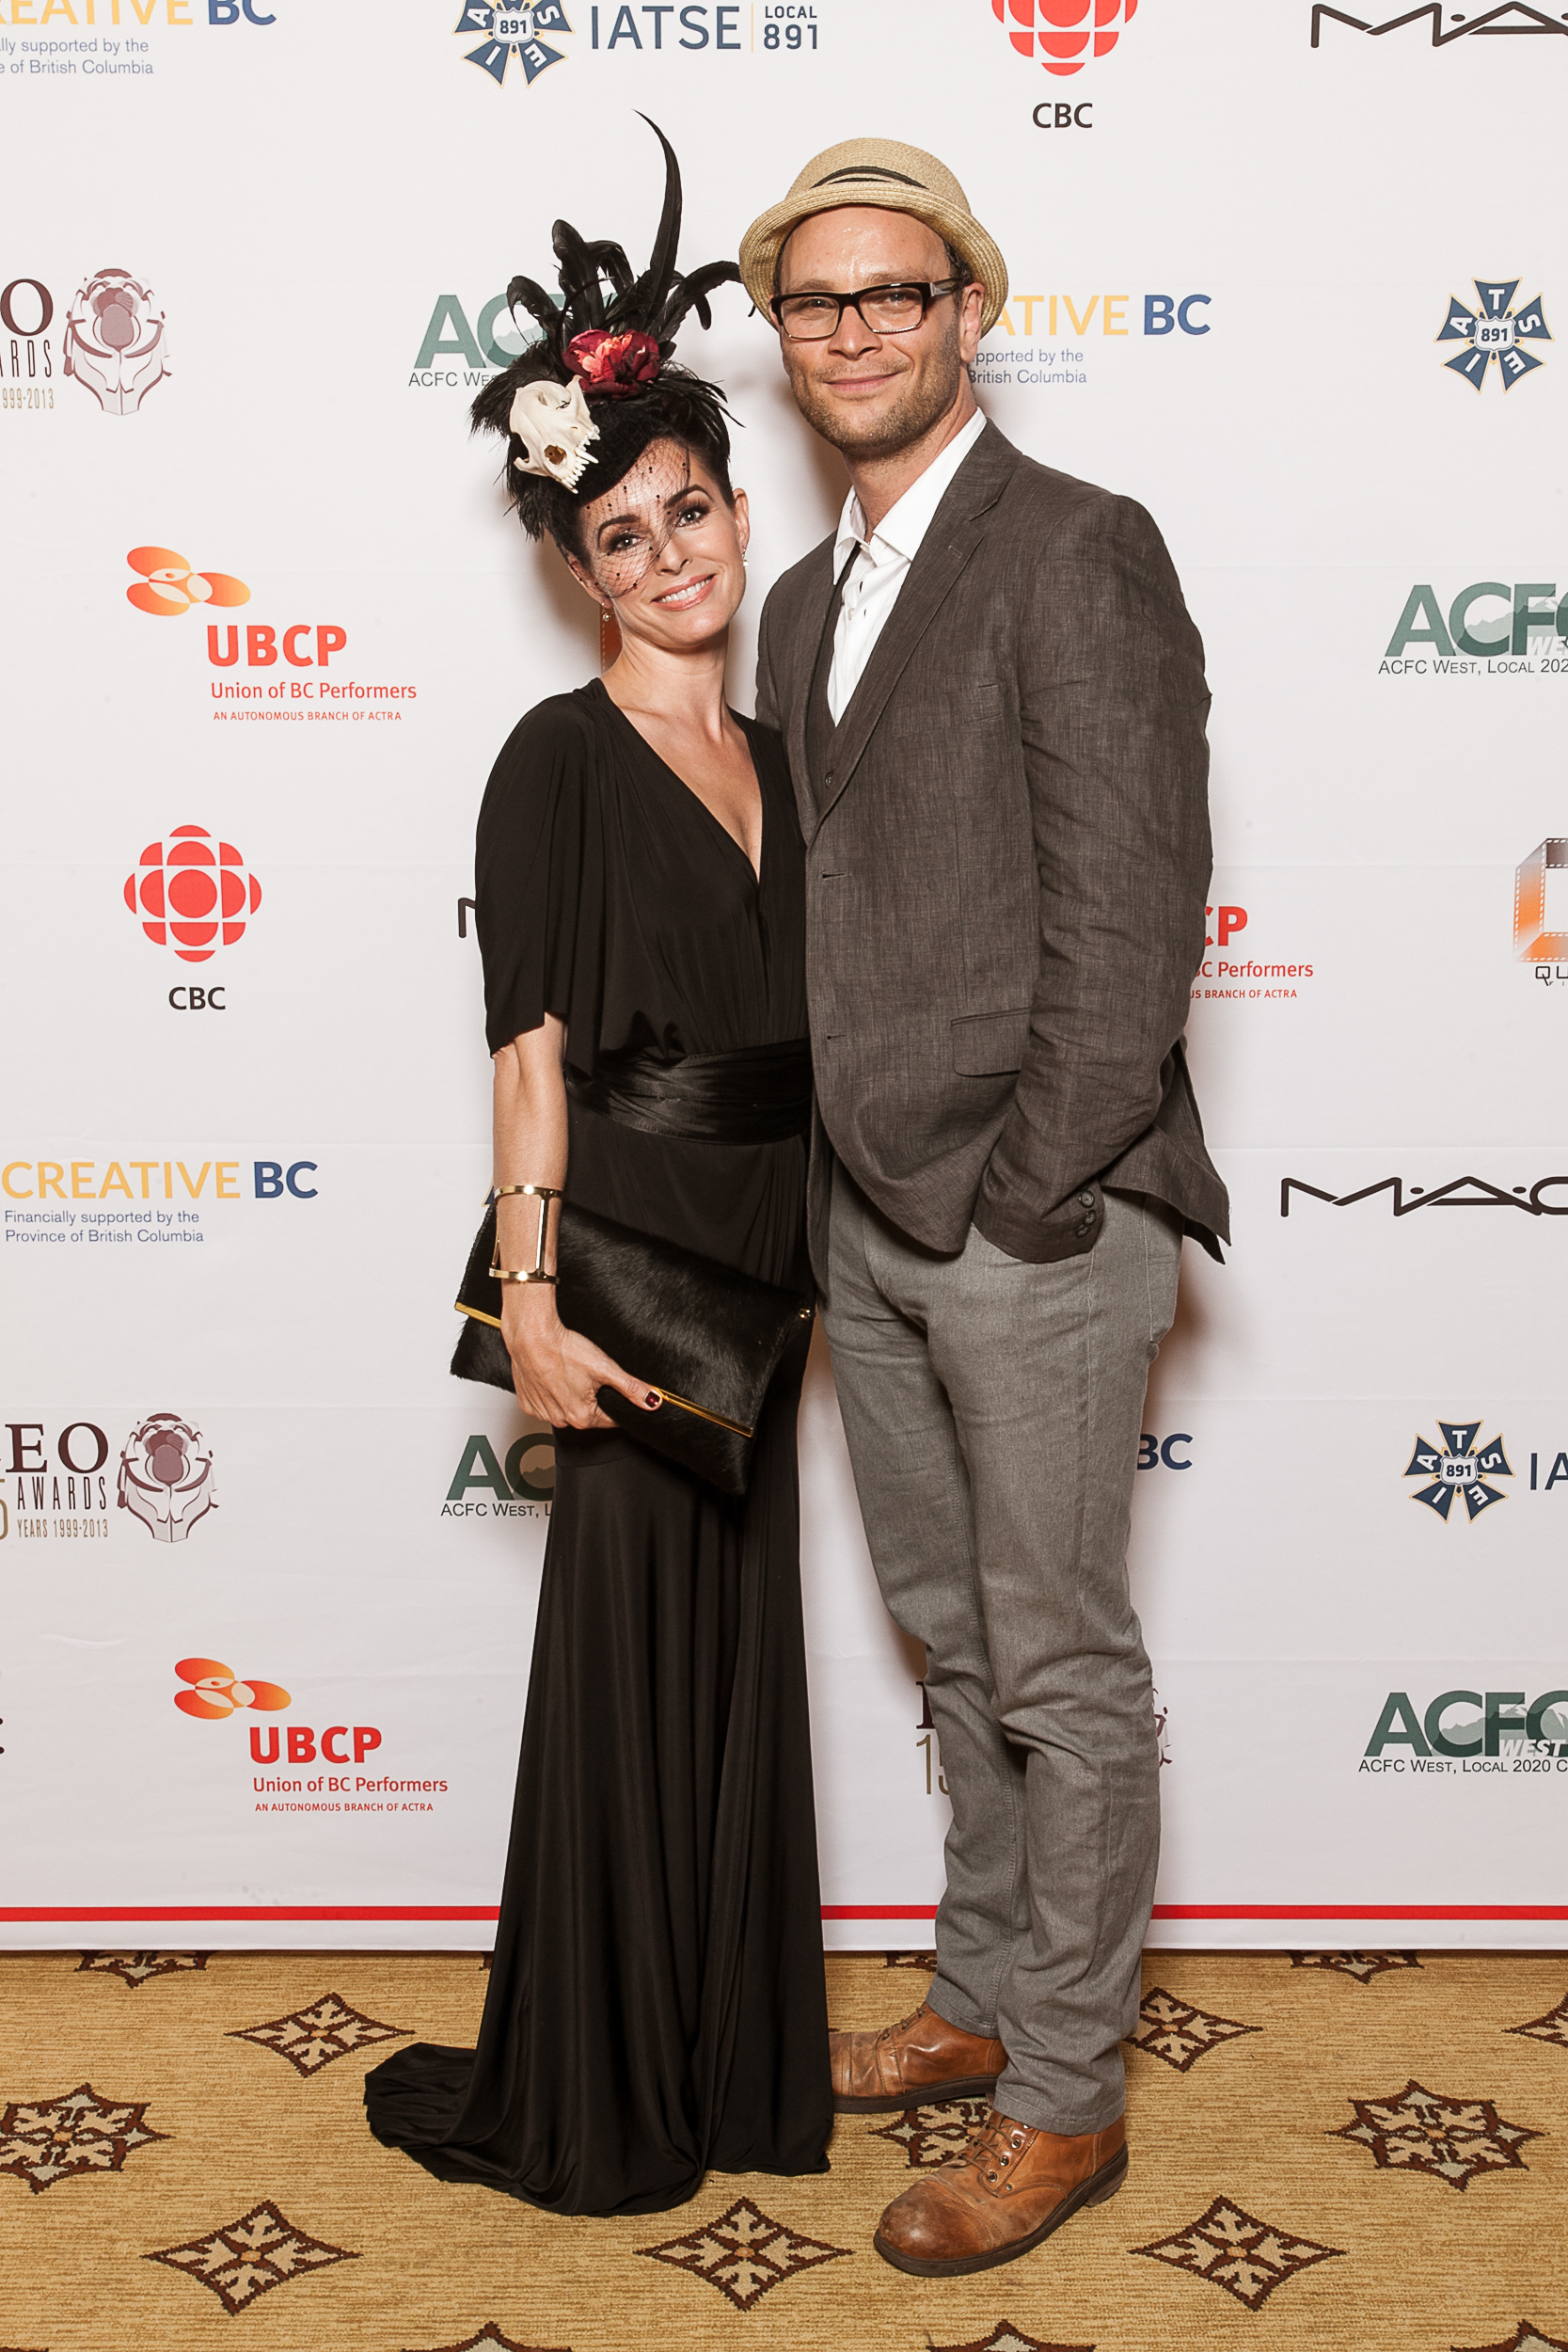 With Ben Cotton at the 2013 Leo Awards, nominated for LATE, directed by Jason Goode, produced by Dylan Jenkinson.